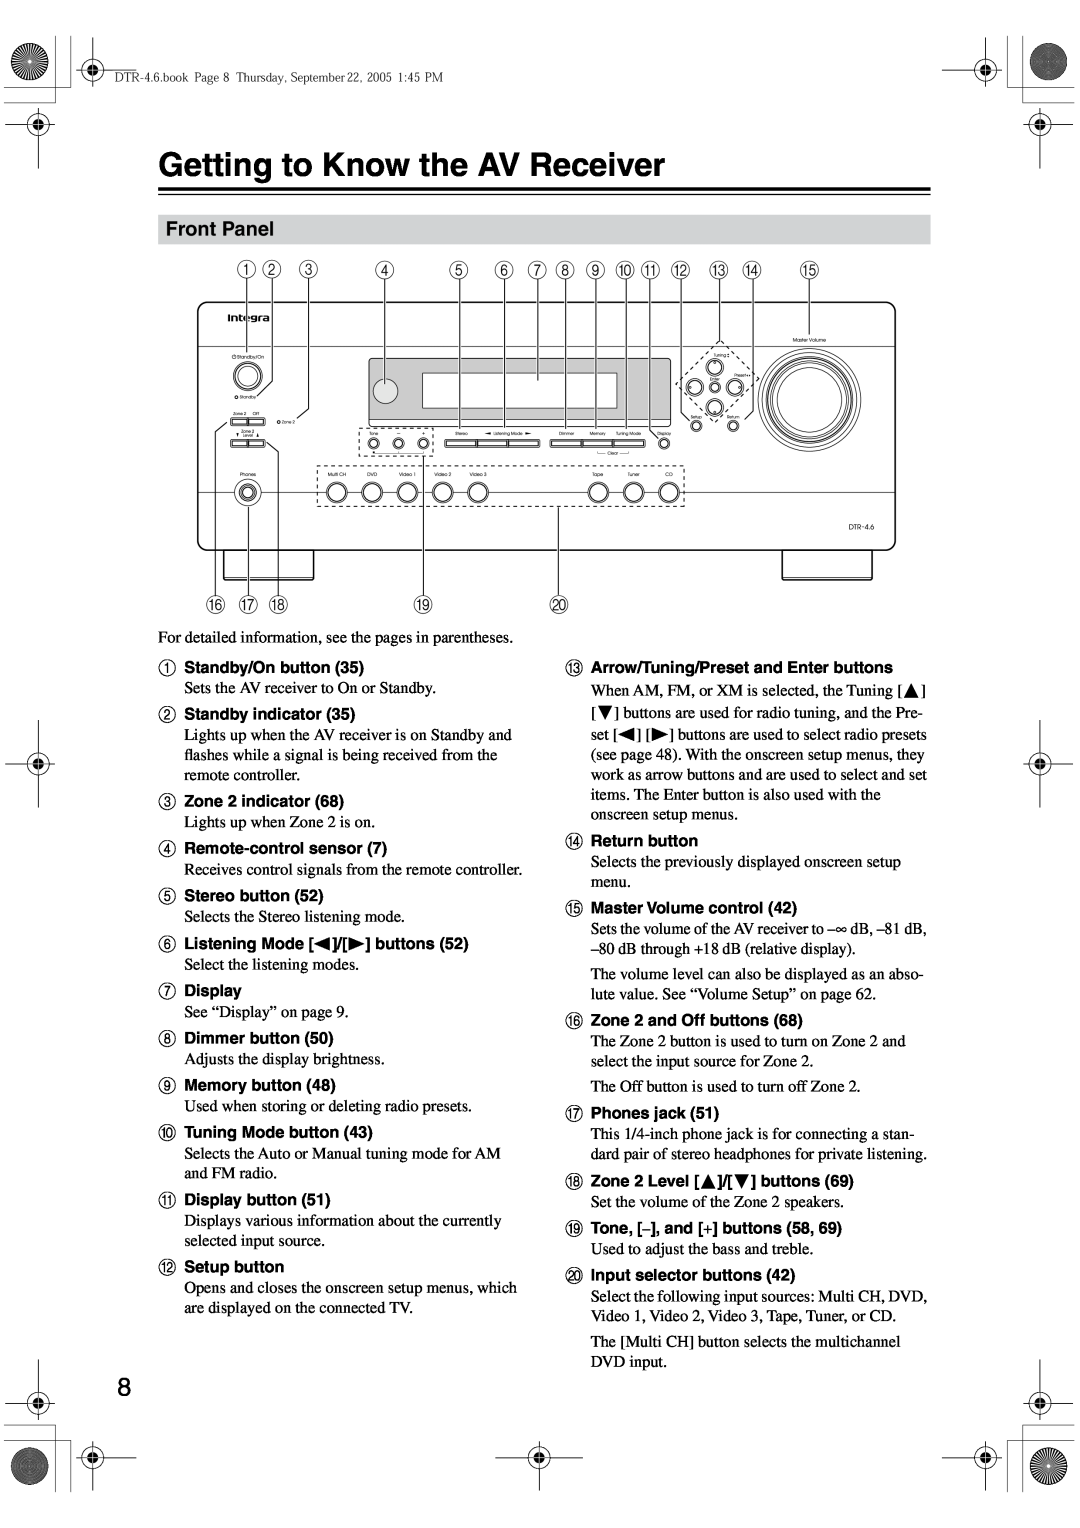 Integra DTR-4.6 instruction manual Getting to Know the AV Receiver, Front Panel, 1 2 3 4 5 6 7 8 9 J K L M N O, P Q R 